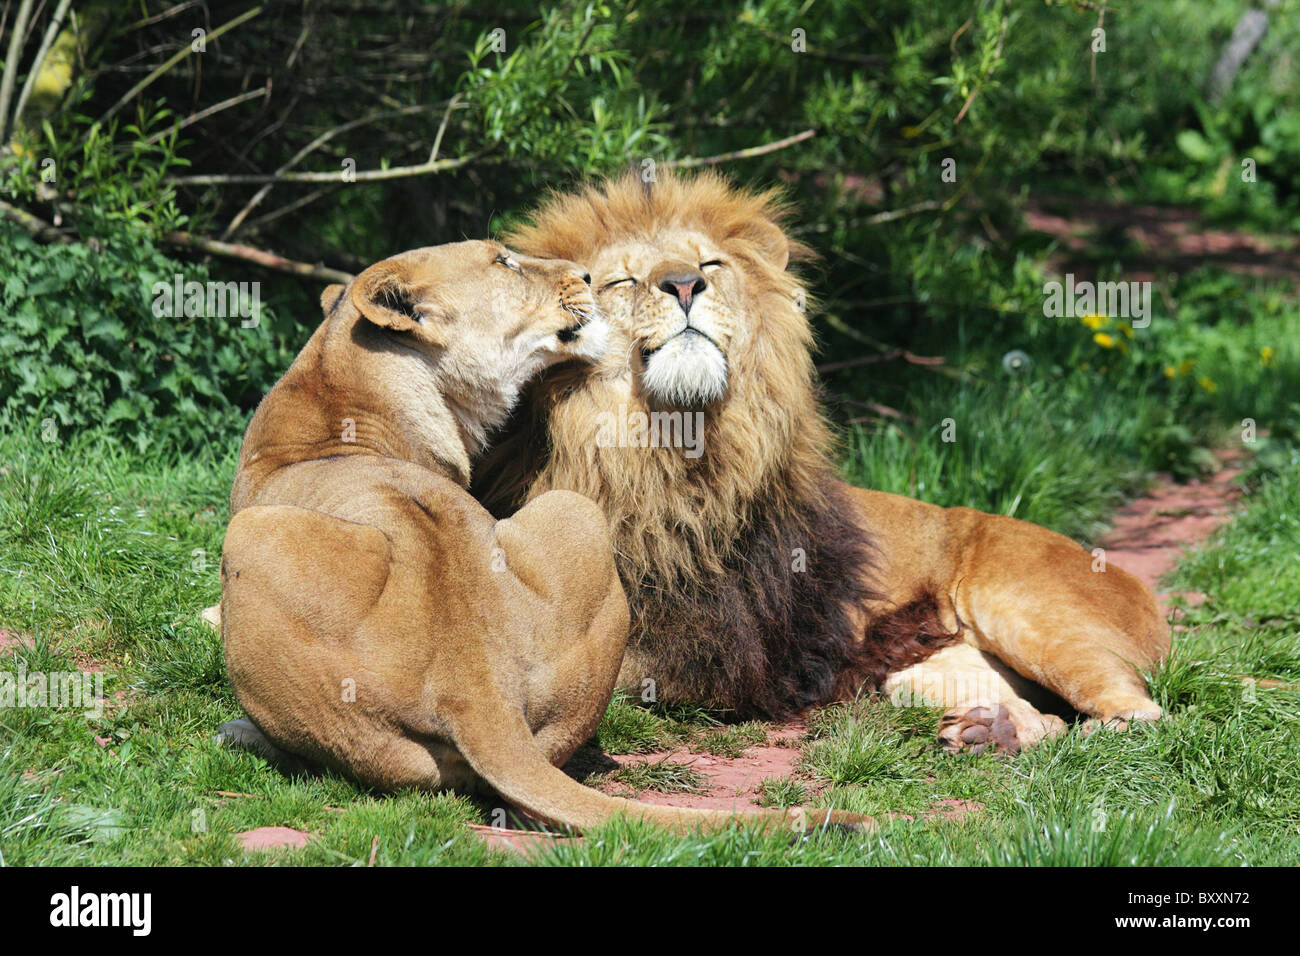 Lions in love Stock Photo